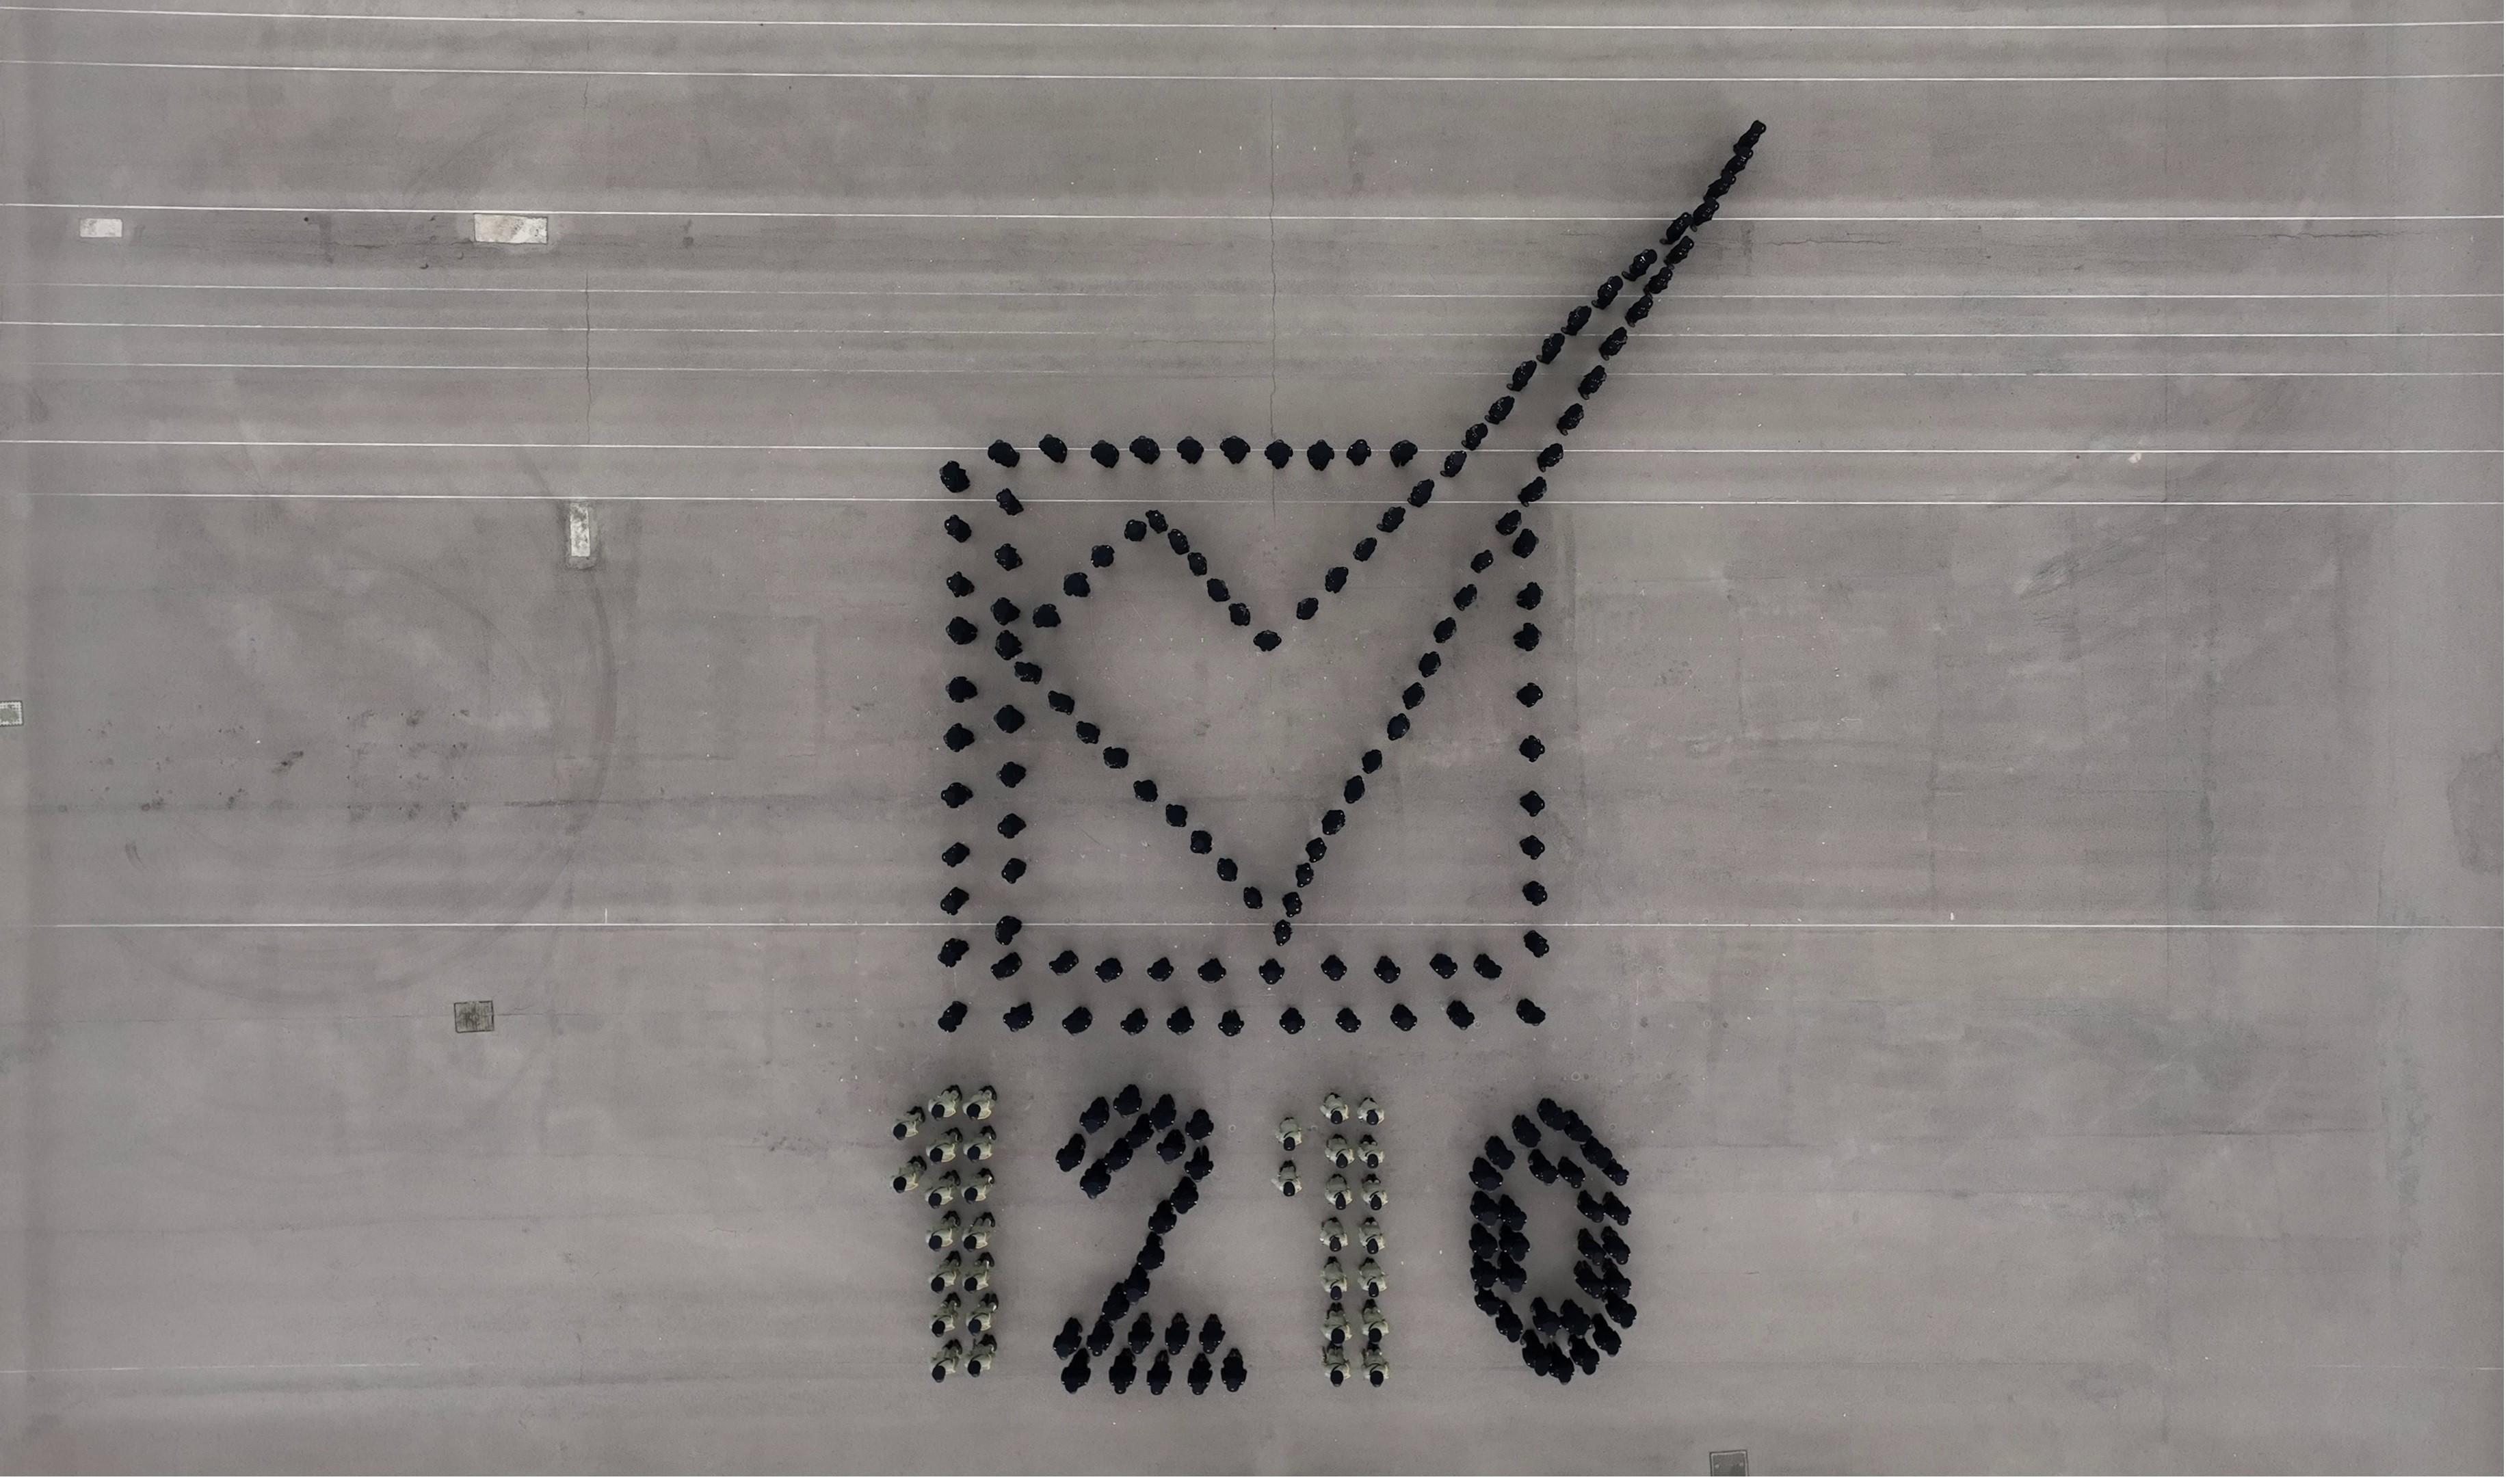 Hong Kong Customs Passing-out Parade was held today (December 8). Photo shows the parade forming a pattern that represents the District Council election.

